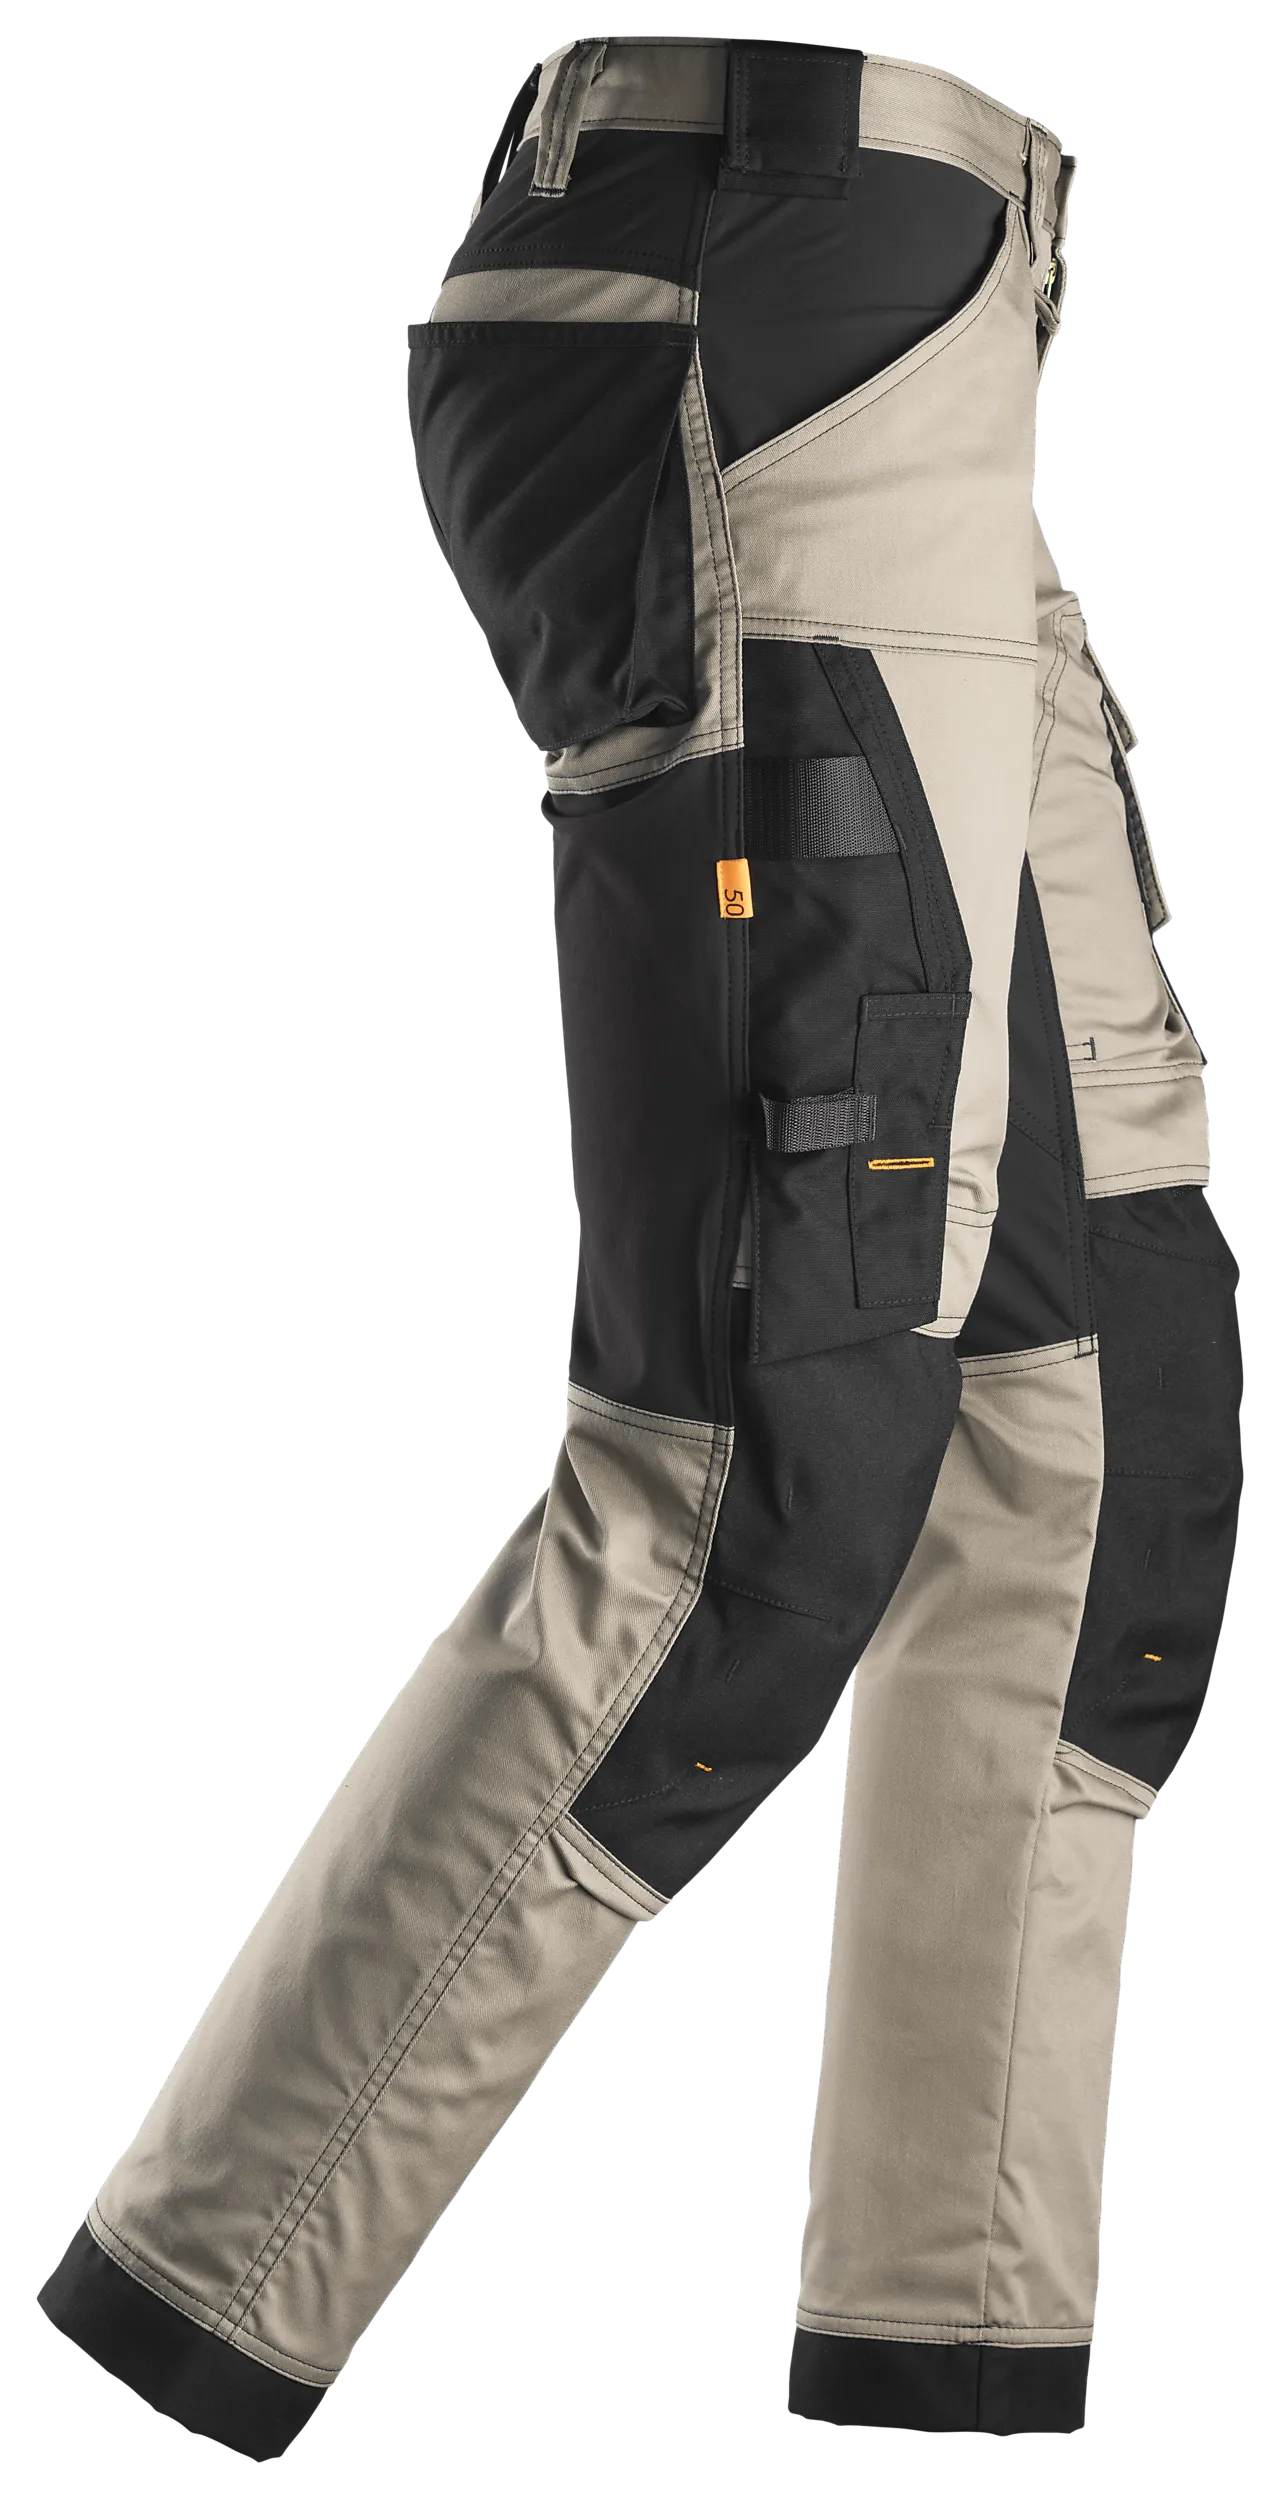 Bukse 6341 stretch 104 snickers workwear null - null - 3 - Miniatyr